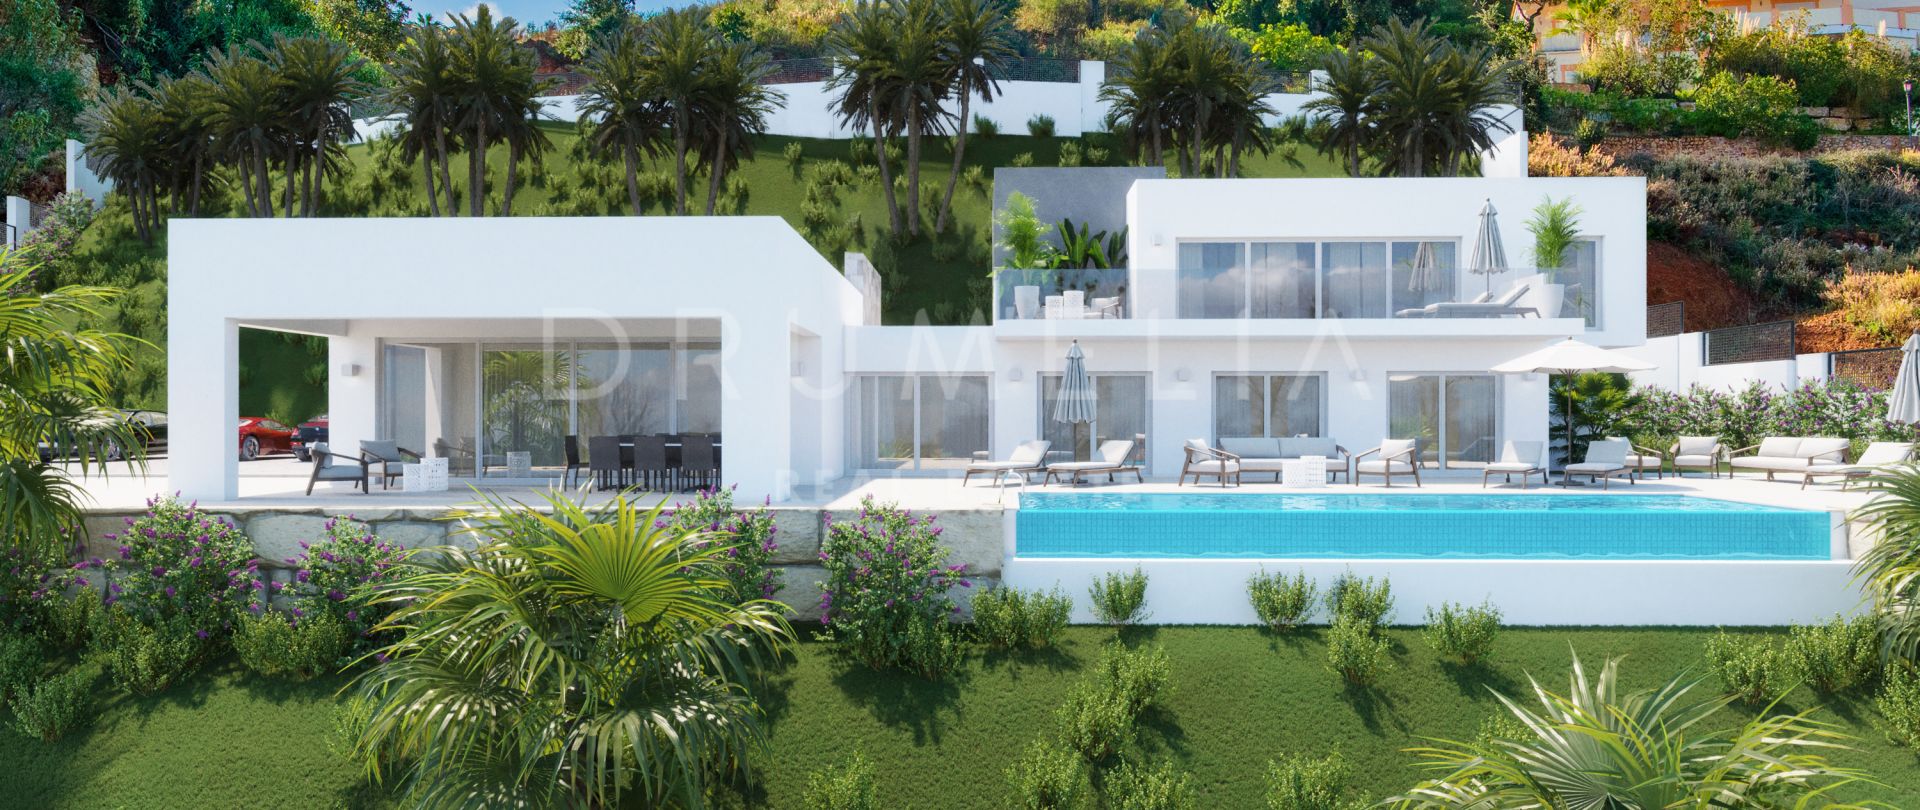 Brand-new Modern Luxury House with Amazing Views in La Mairena, Marbella East